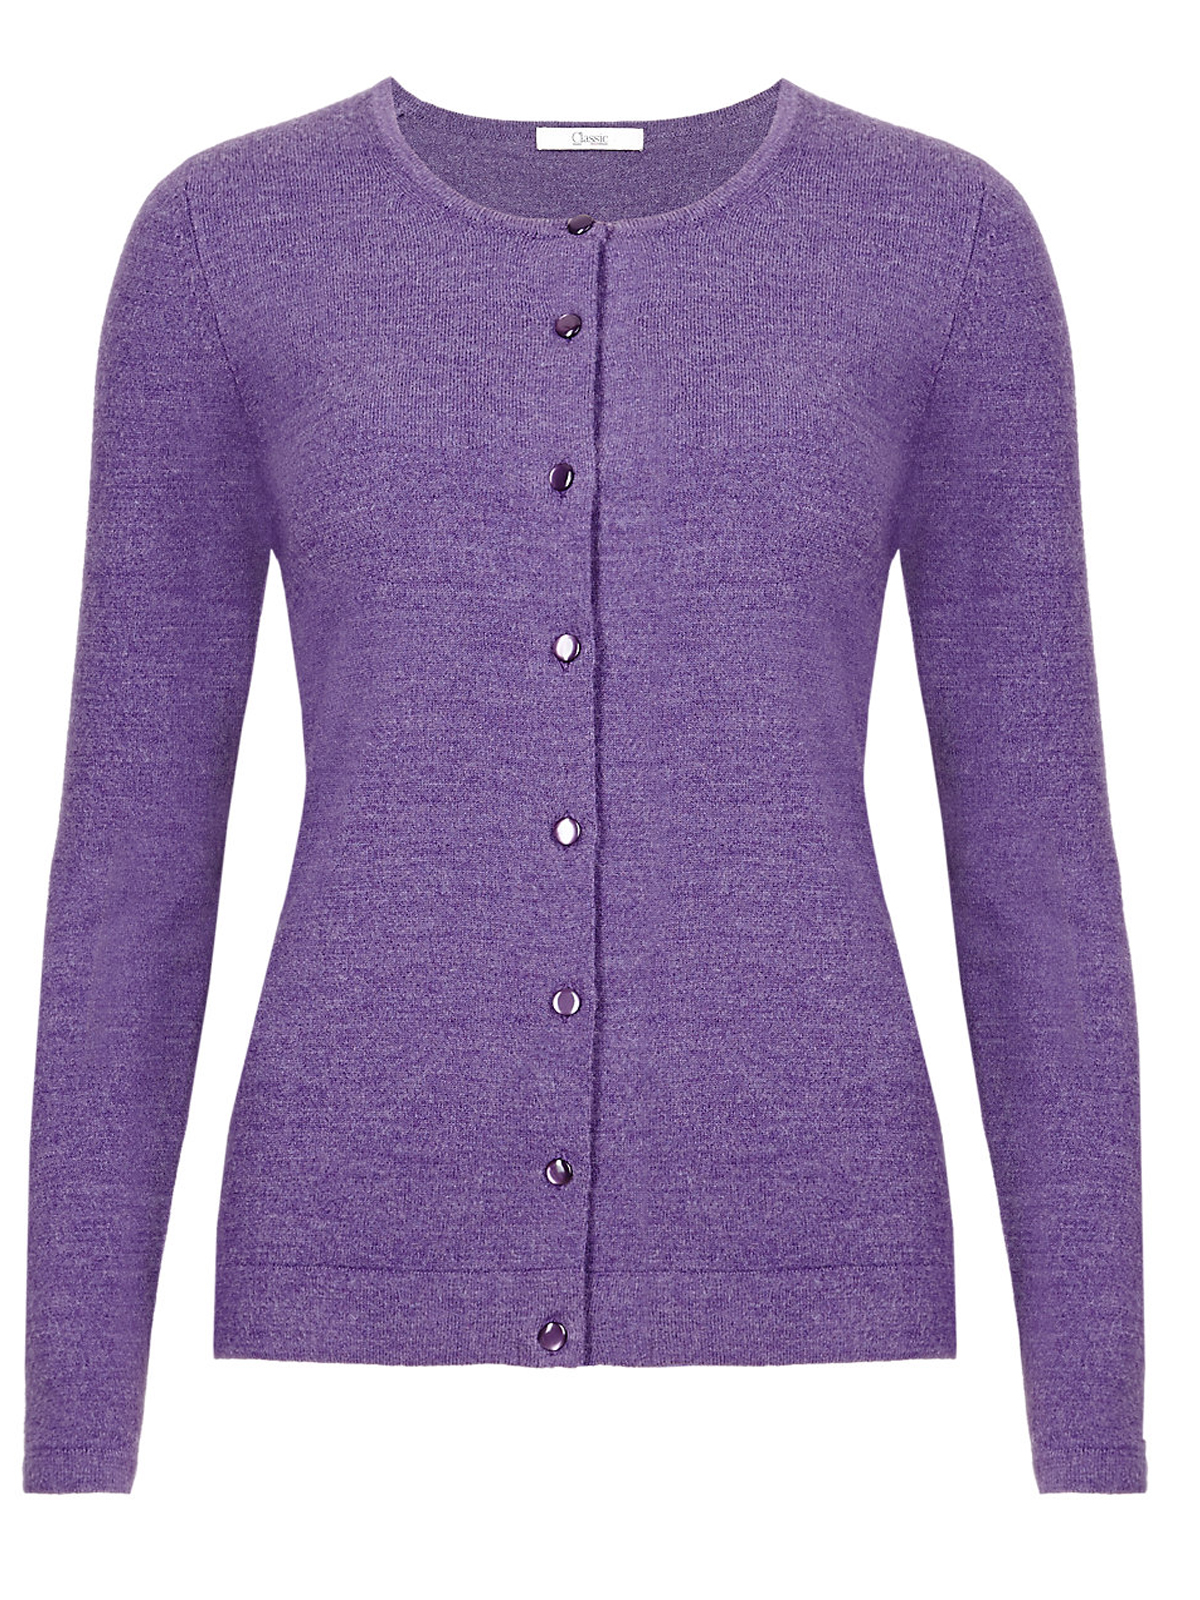 Marks and Spencer - - M&5 PURPLE Button Through Knitted Cardigan - Size ...